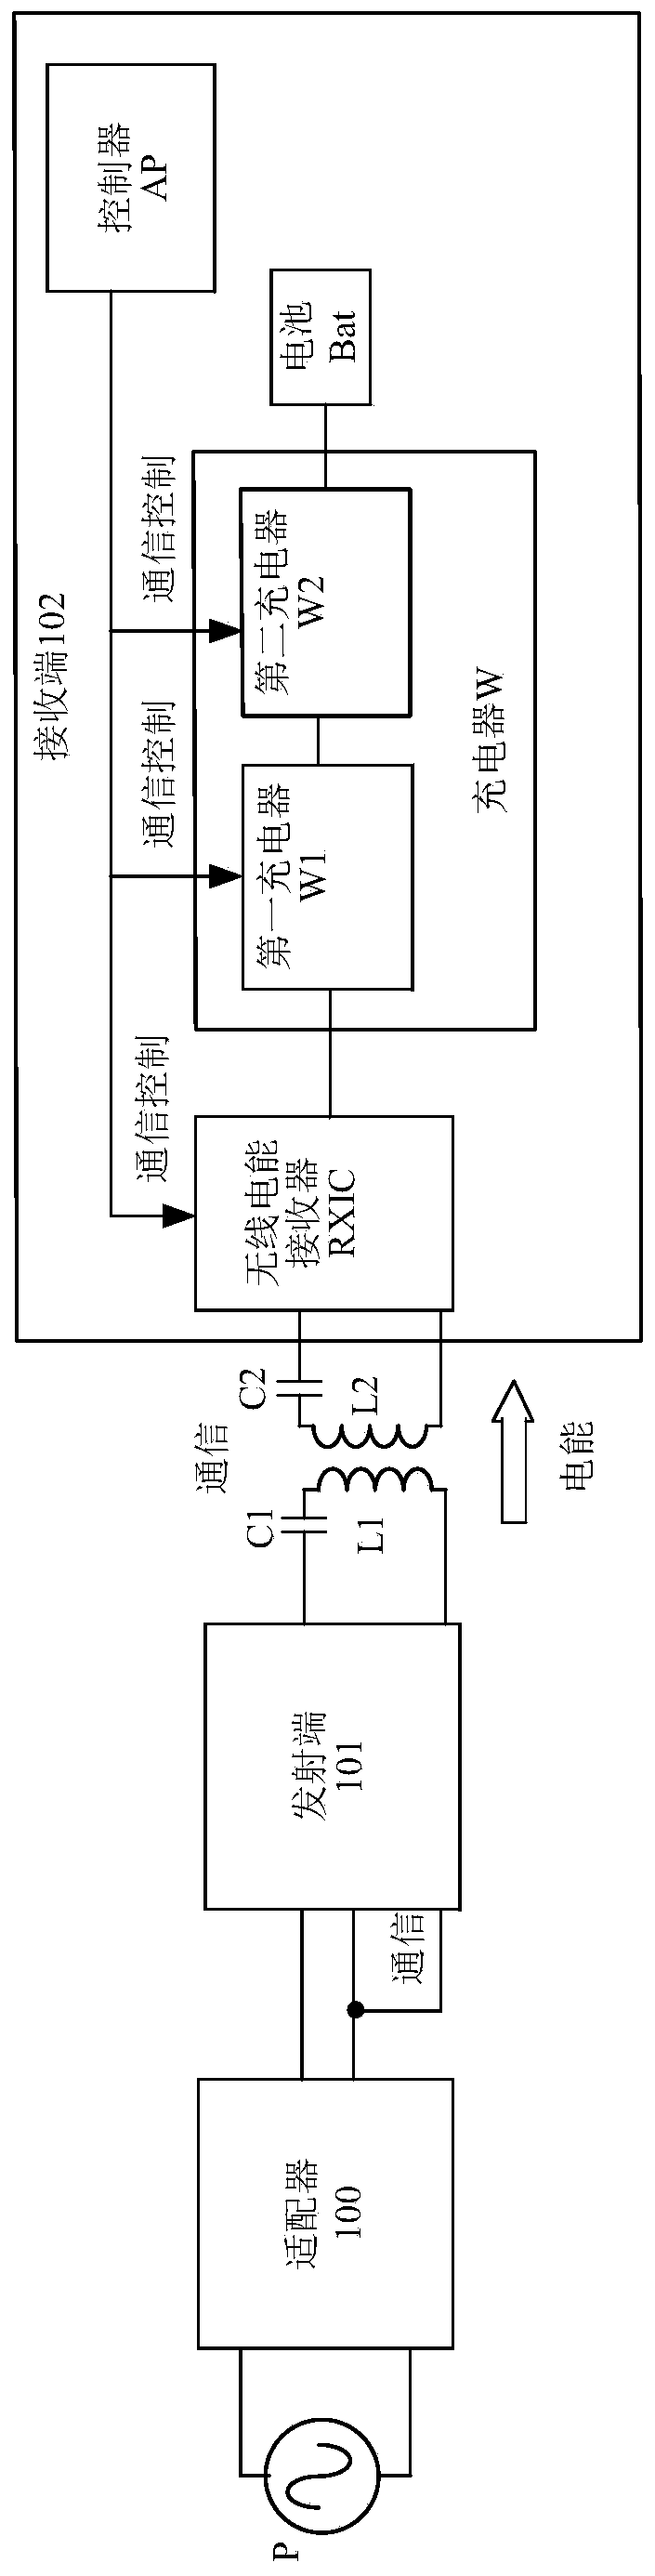 Wireless charging electronic equipment, method and system